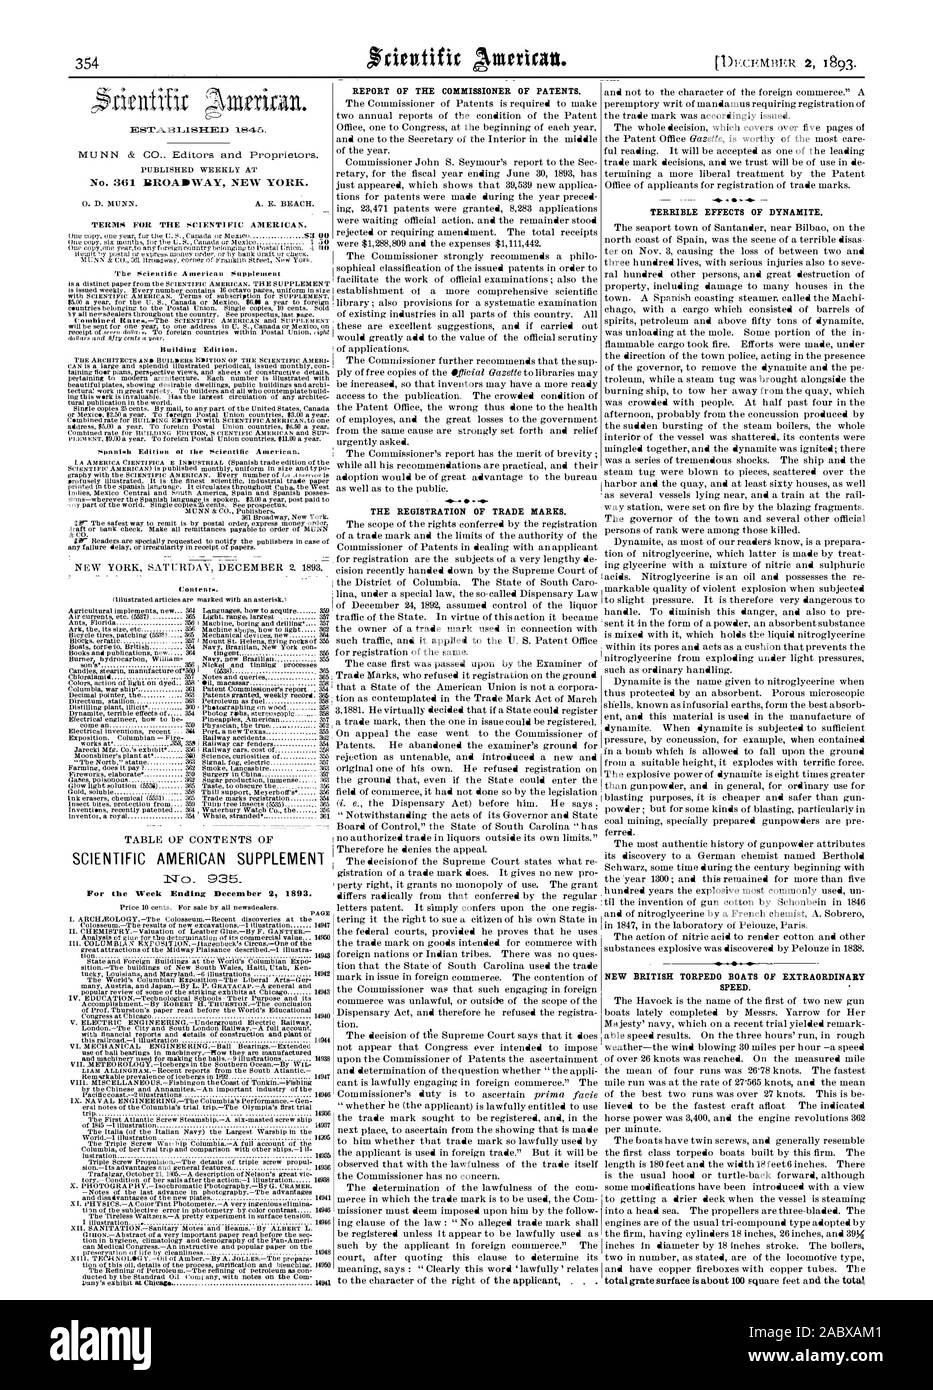 For the Week Rodin?: December 2 1893. REPORT OF THE COMMISSIONER OF PATENTS. THE REGISTRATION OF TRADE MARKS. TERRIBLE EFFECTS OF DYNAMITE. NEW BRITISH TORPEDO BOATS OF EXTRAORDINARY SPEED., scientific american, 1893-12-02 Stock Photo